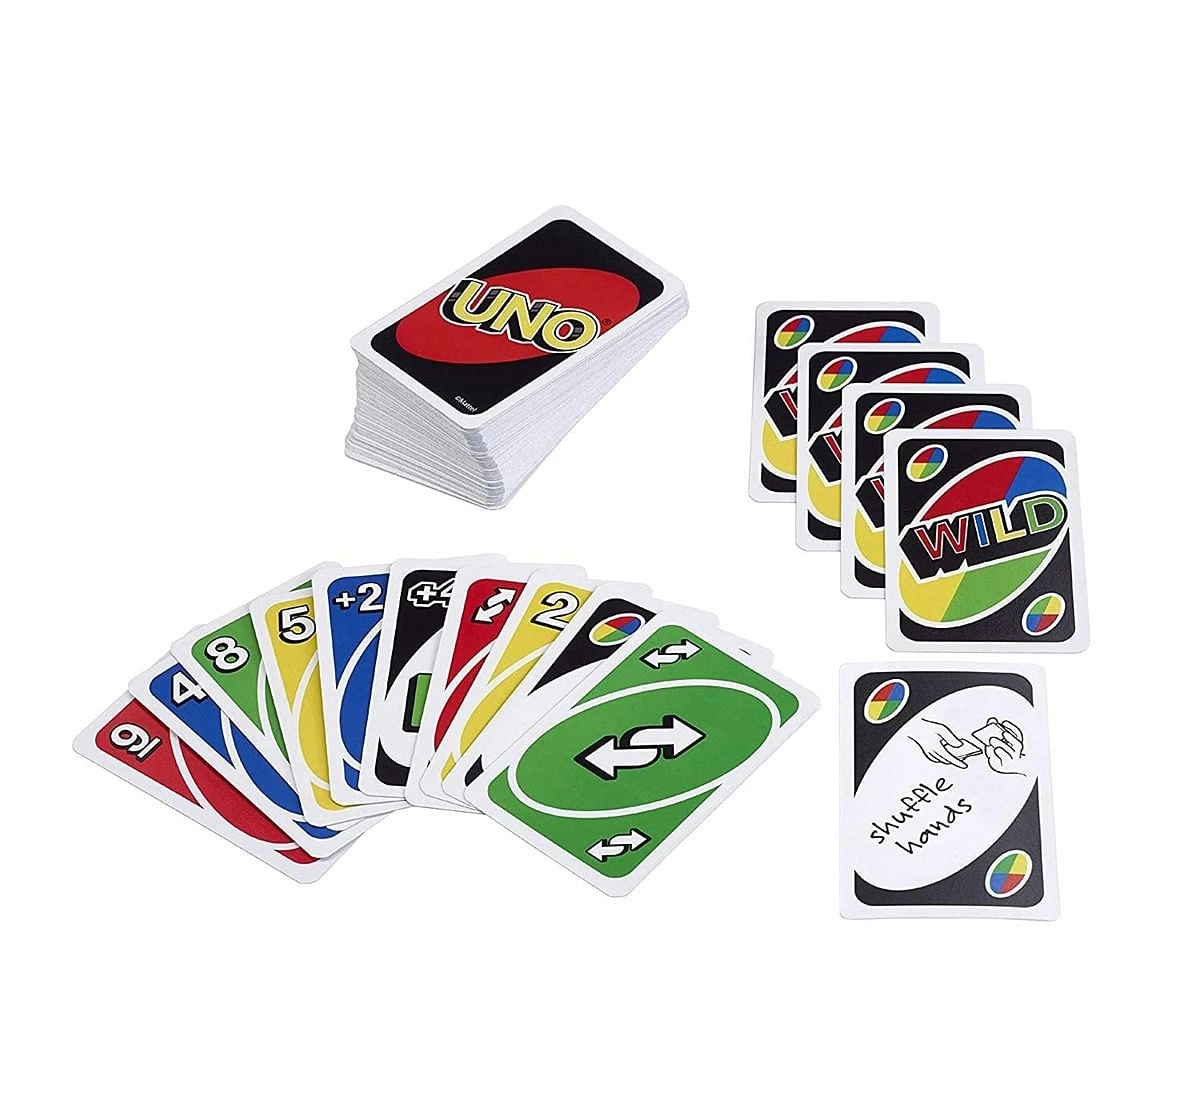 Mattel Uno Card Game, Classic Family Fun, 112-Card Deck with Special Action Cards, Age 7Y+ 